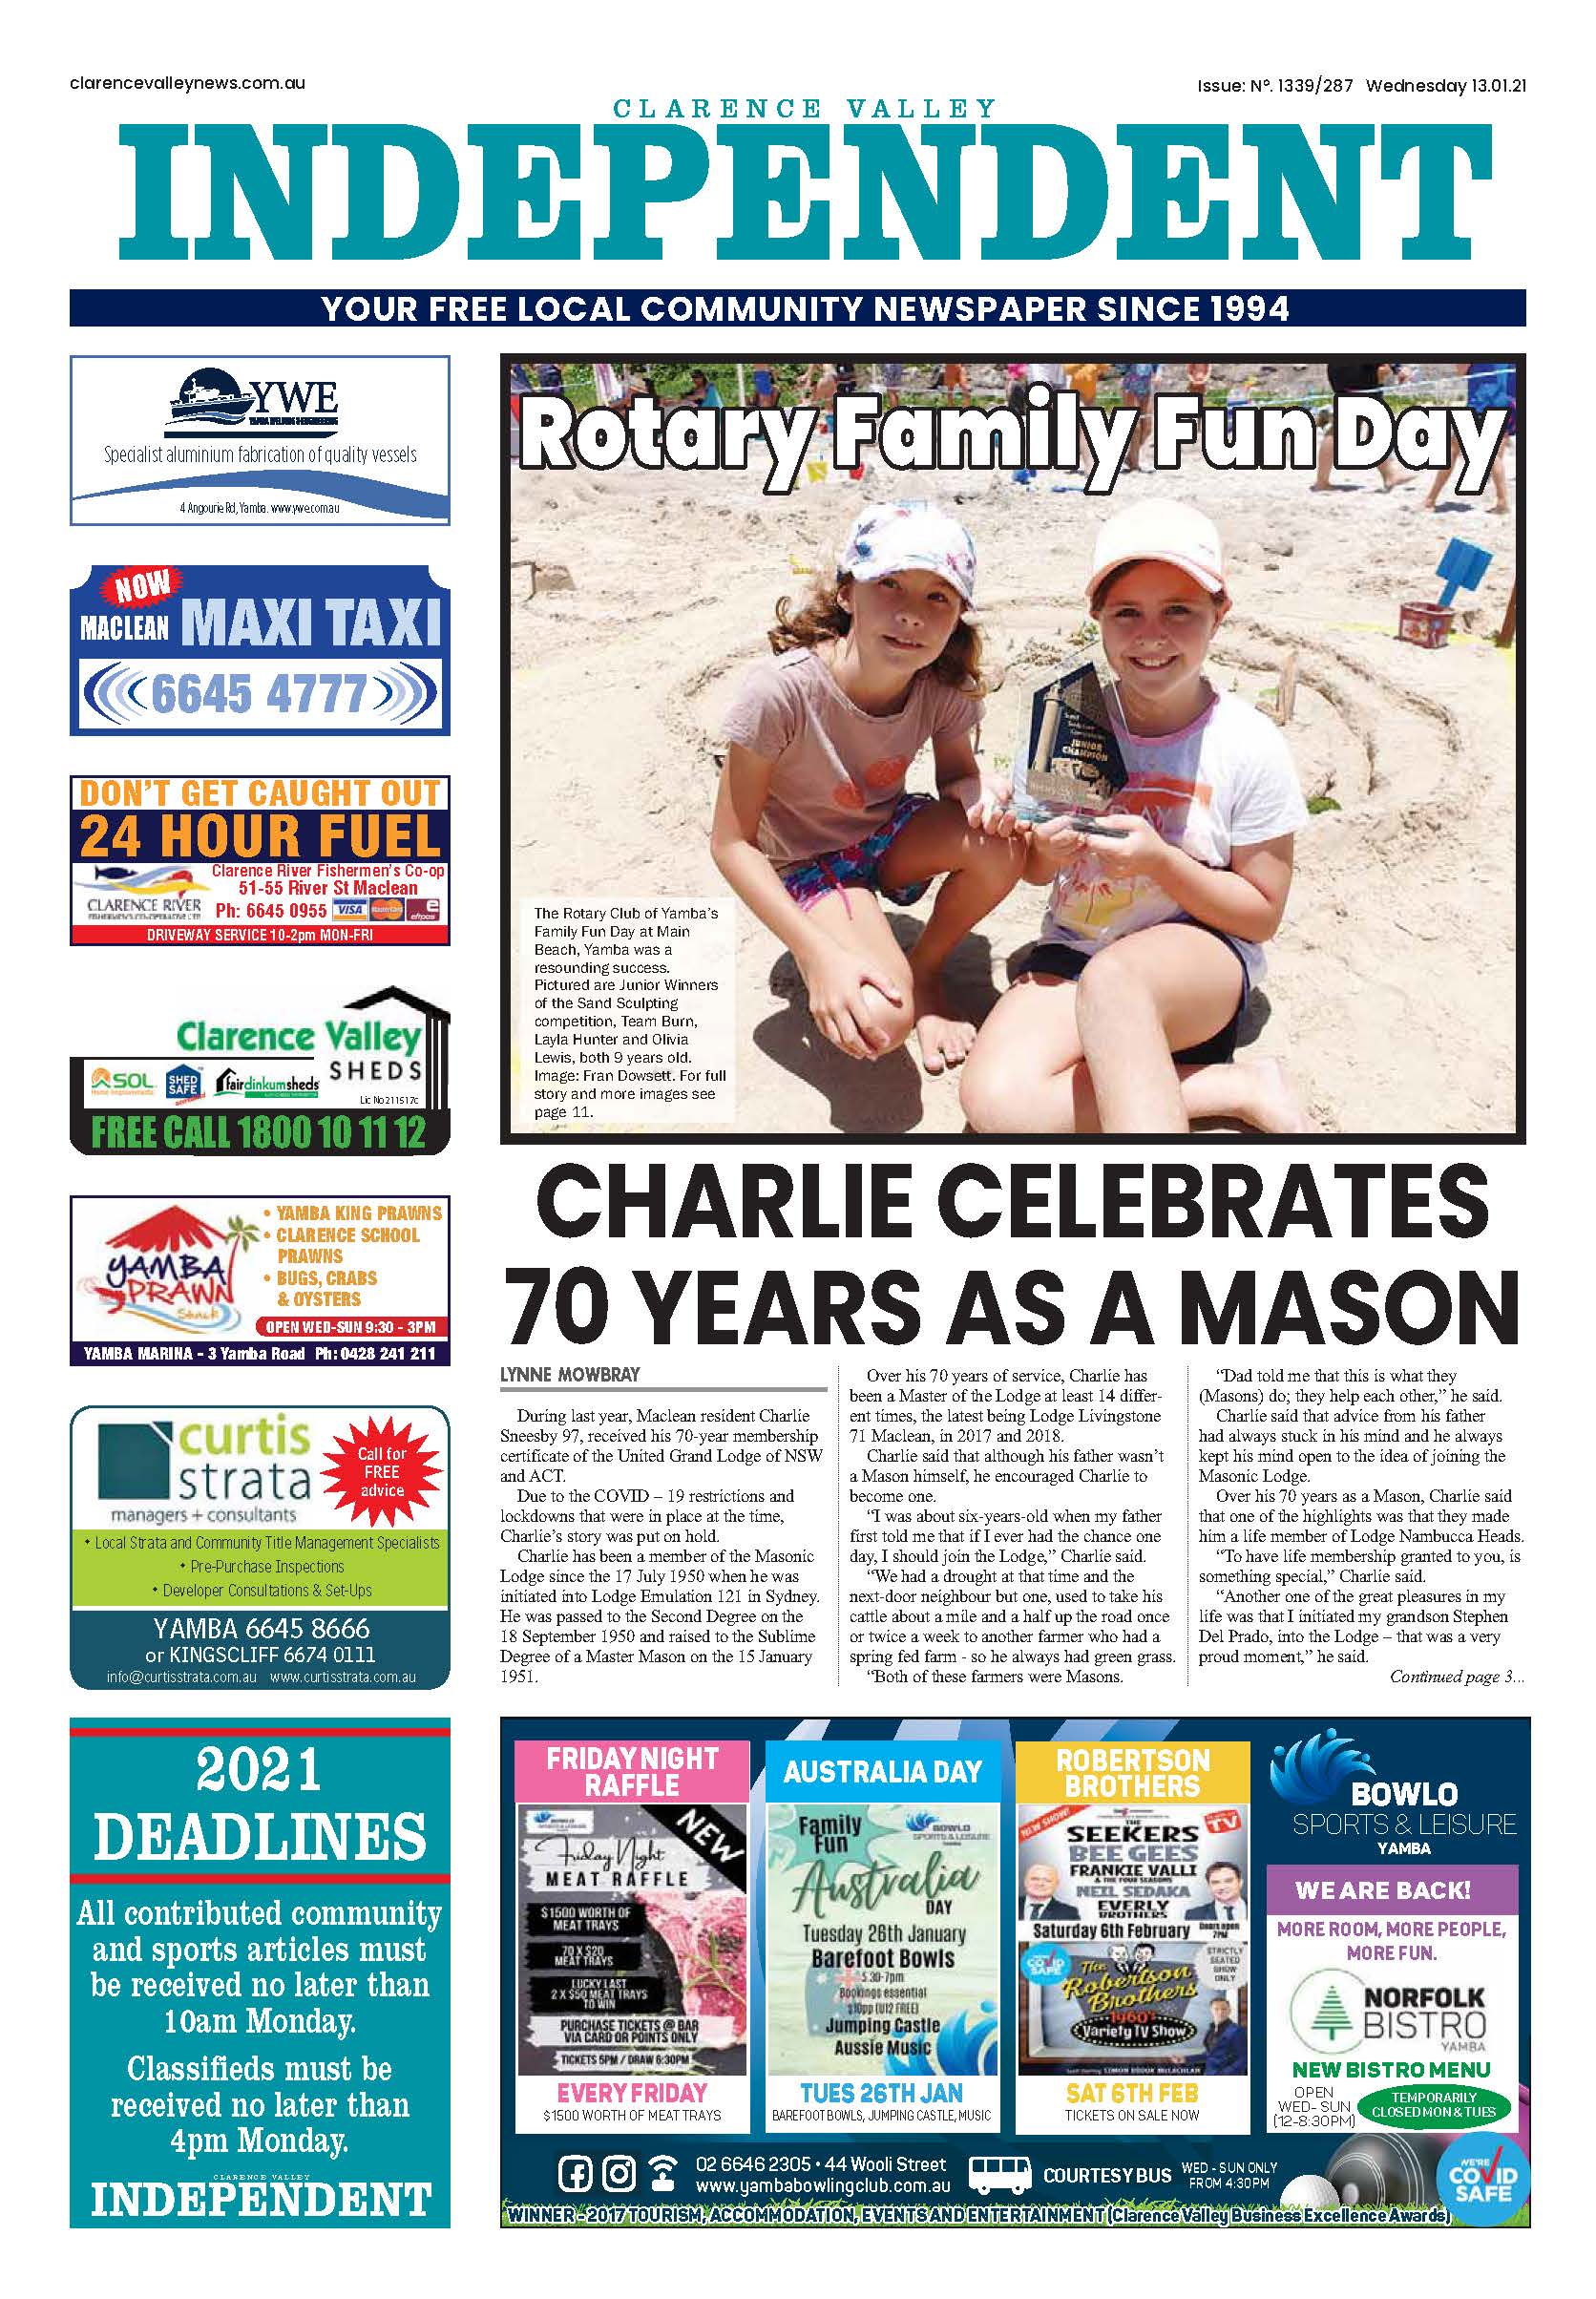 Clarence Valley Independent 13 January 2021